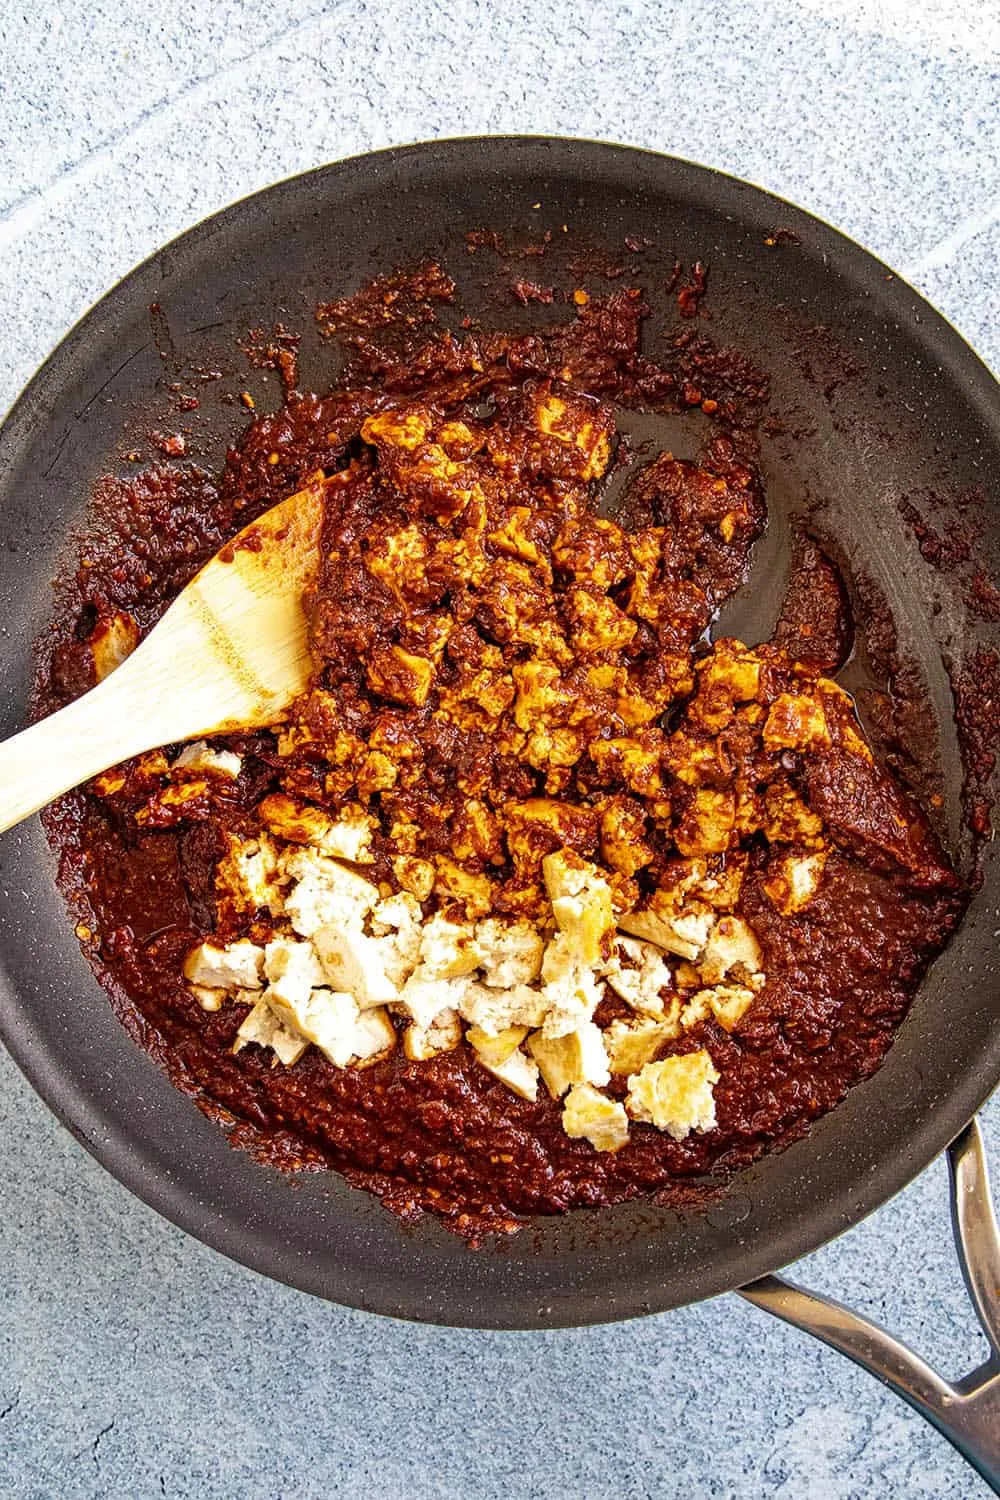 Stirring fried tofu into our spicy chipotle sofritas sauce